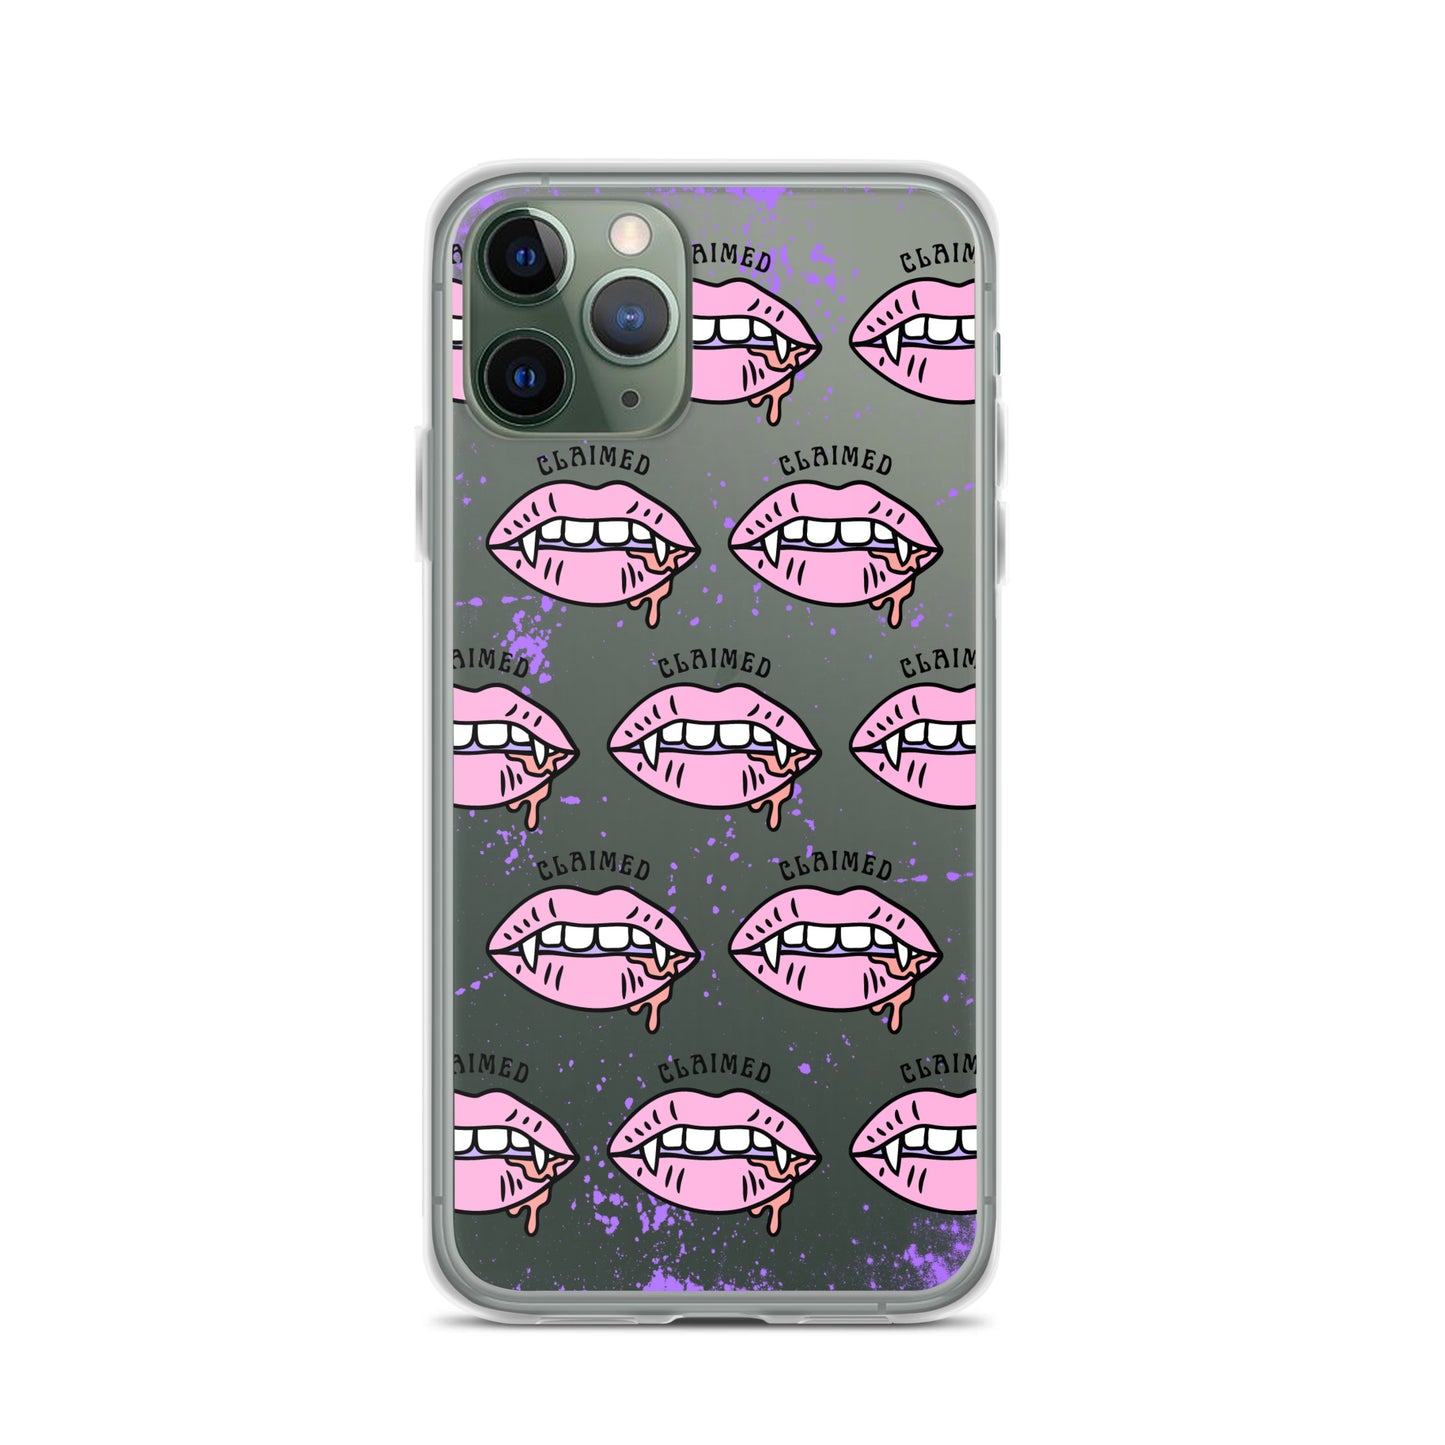 Claimed Pink iPhone Case